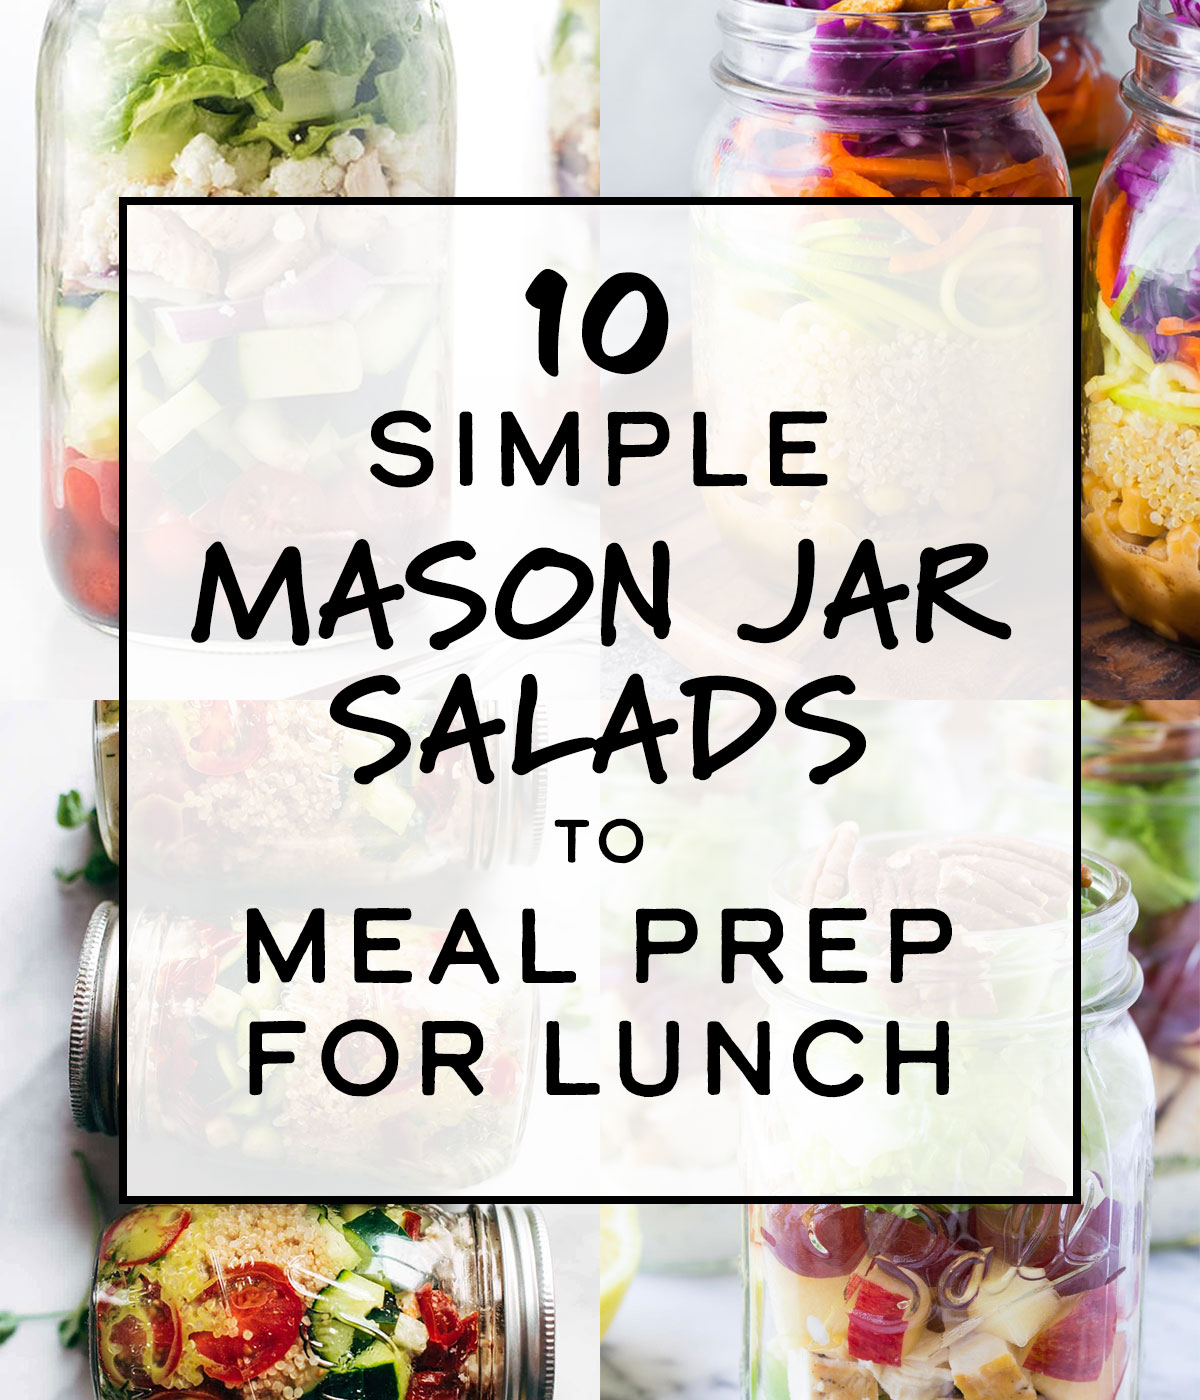 cover title image for 10 simple mason jar salads to meal prep for lunch